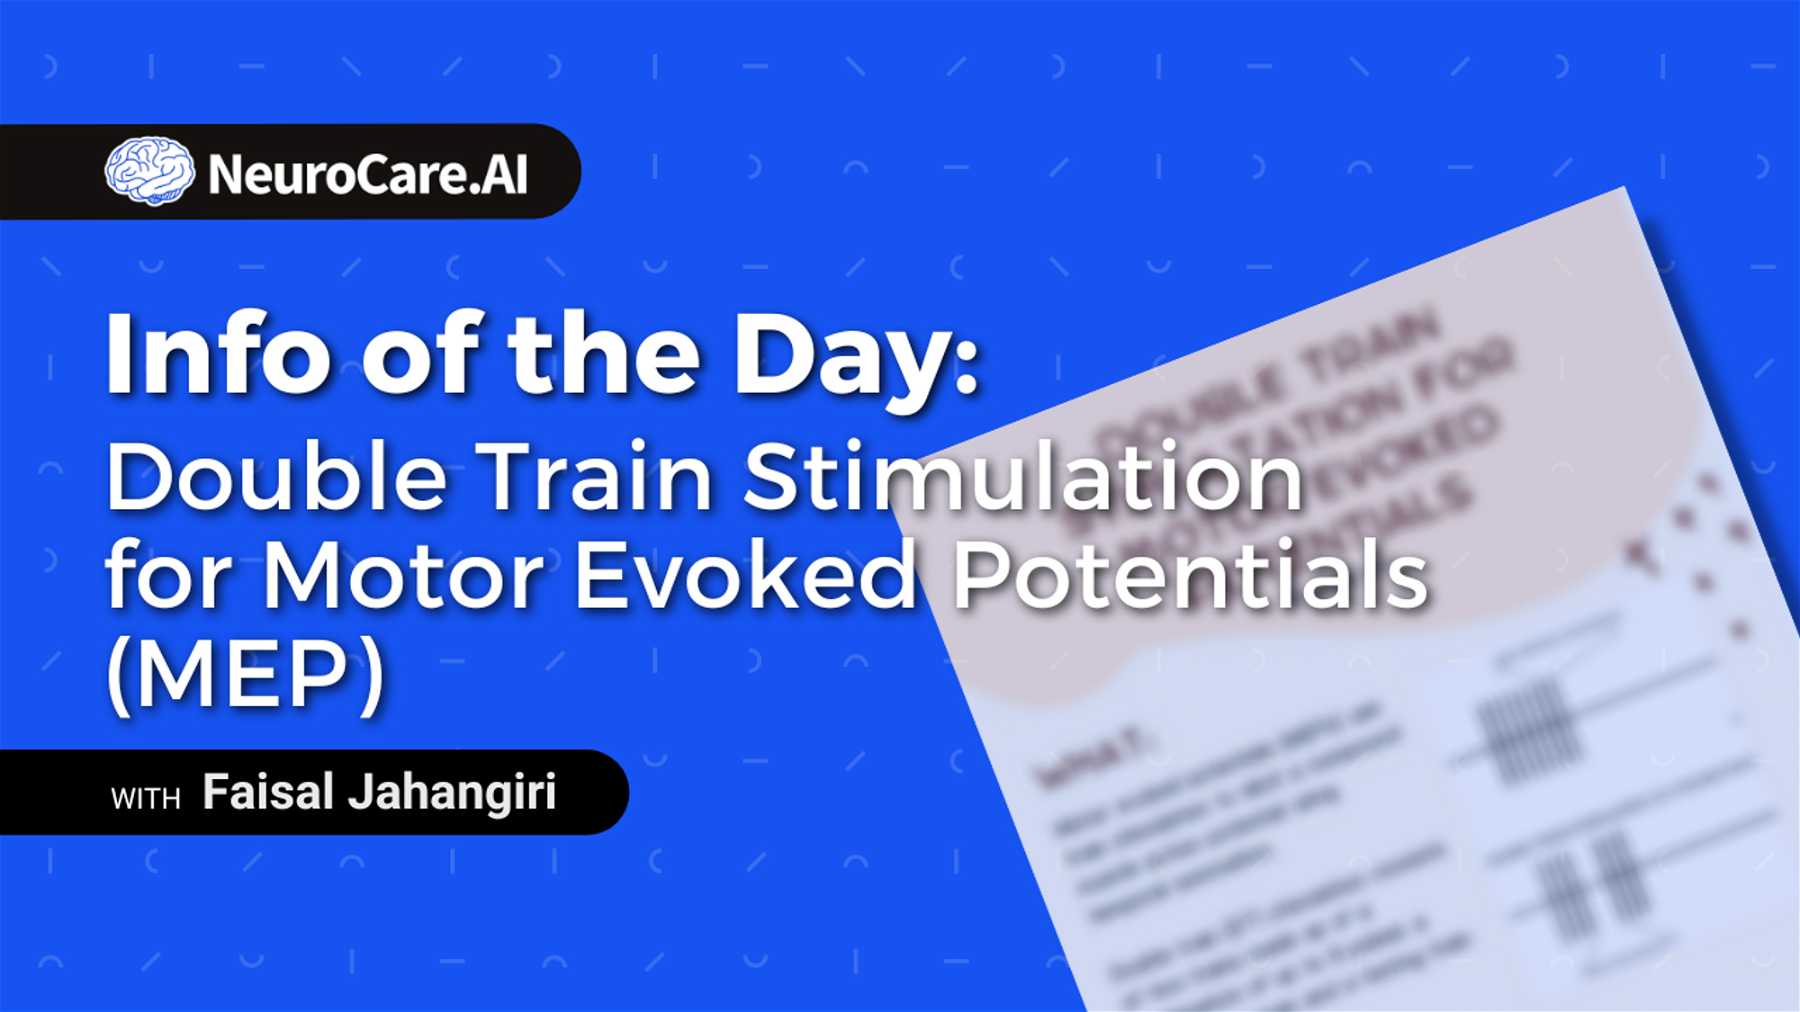 Info of the Day: "Double Train Stimulation for Motor Evoked Potentials (MEP)"